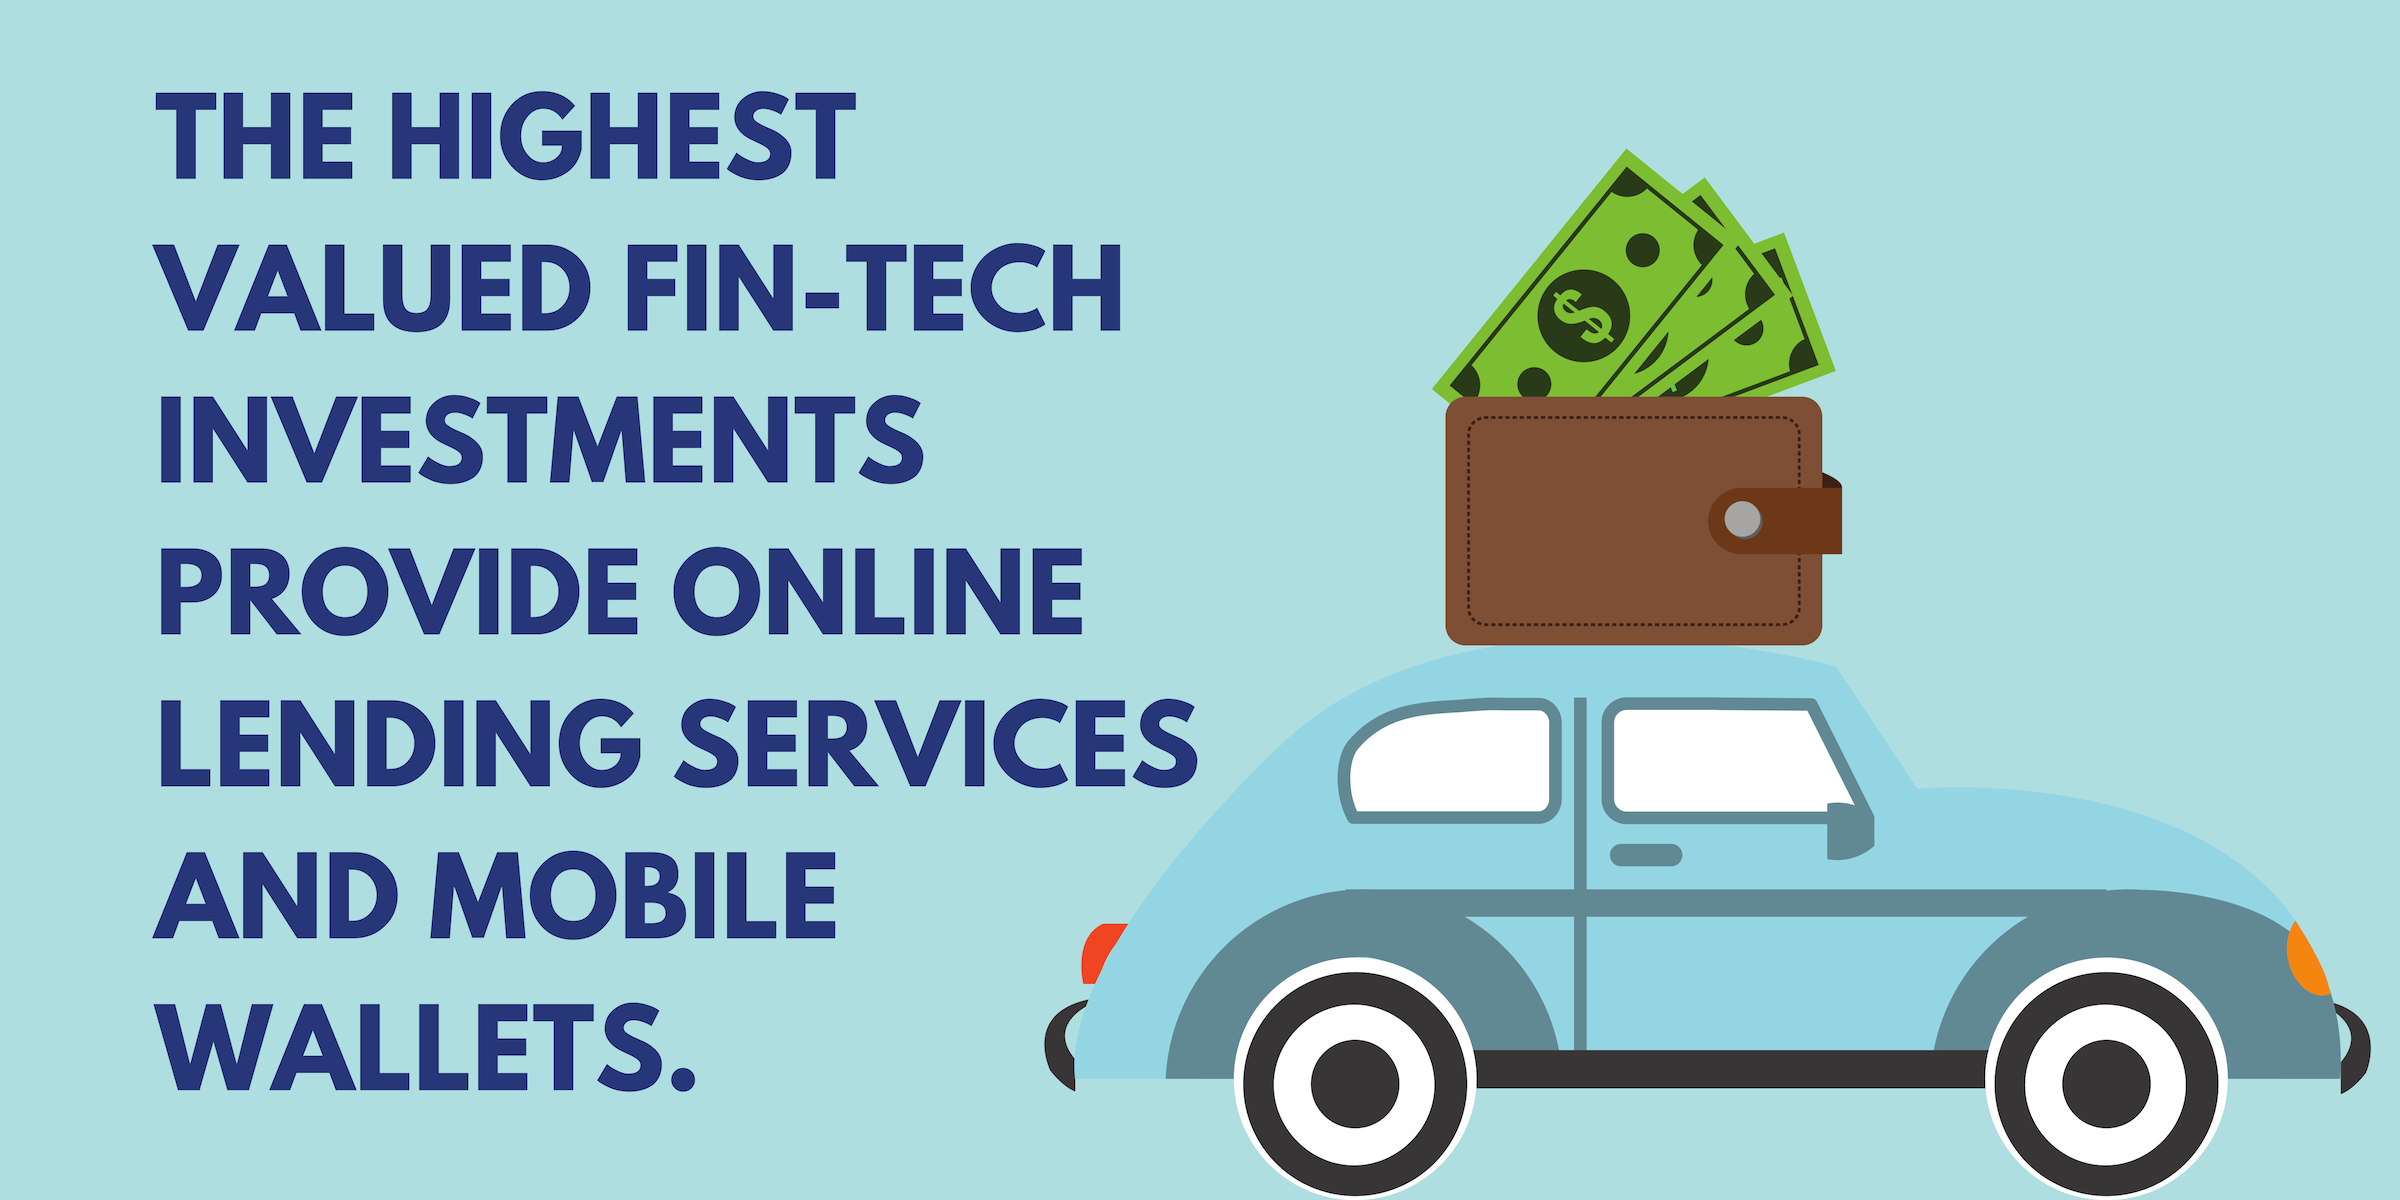 The highest values fin-tech investments provide online lending services and mobile wallets.